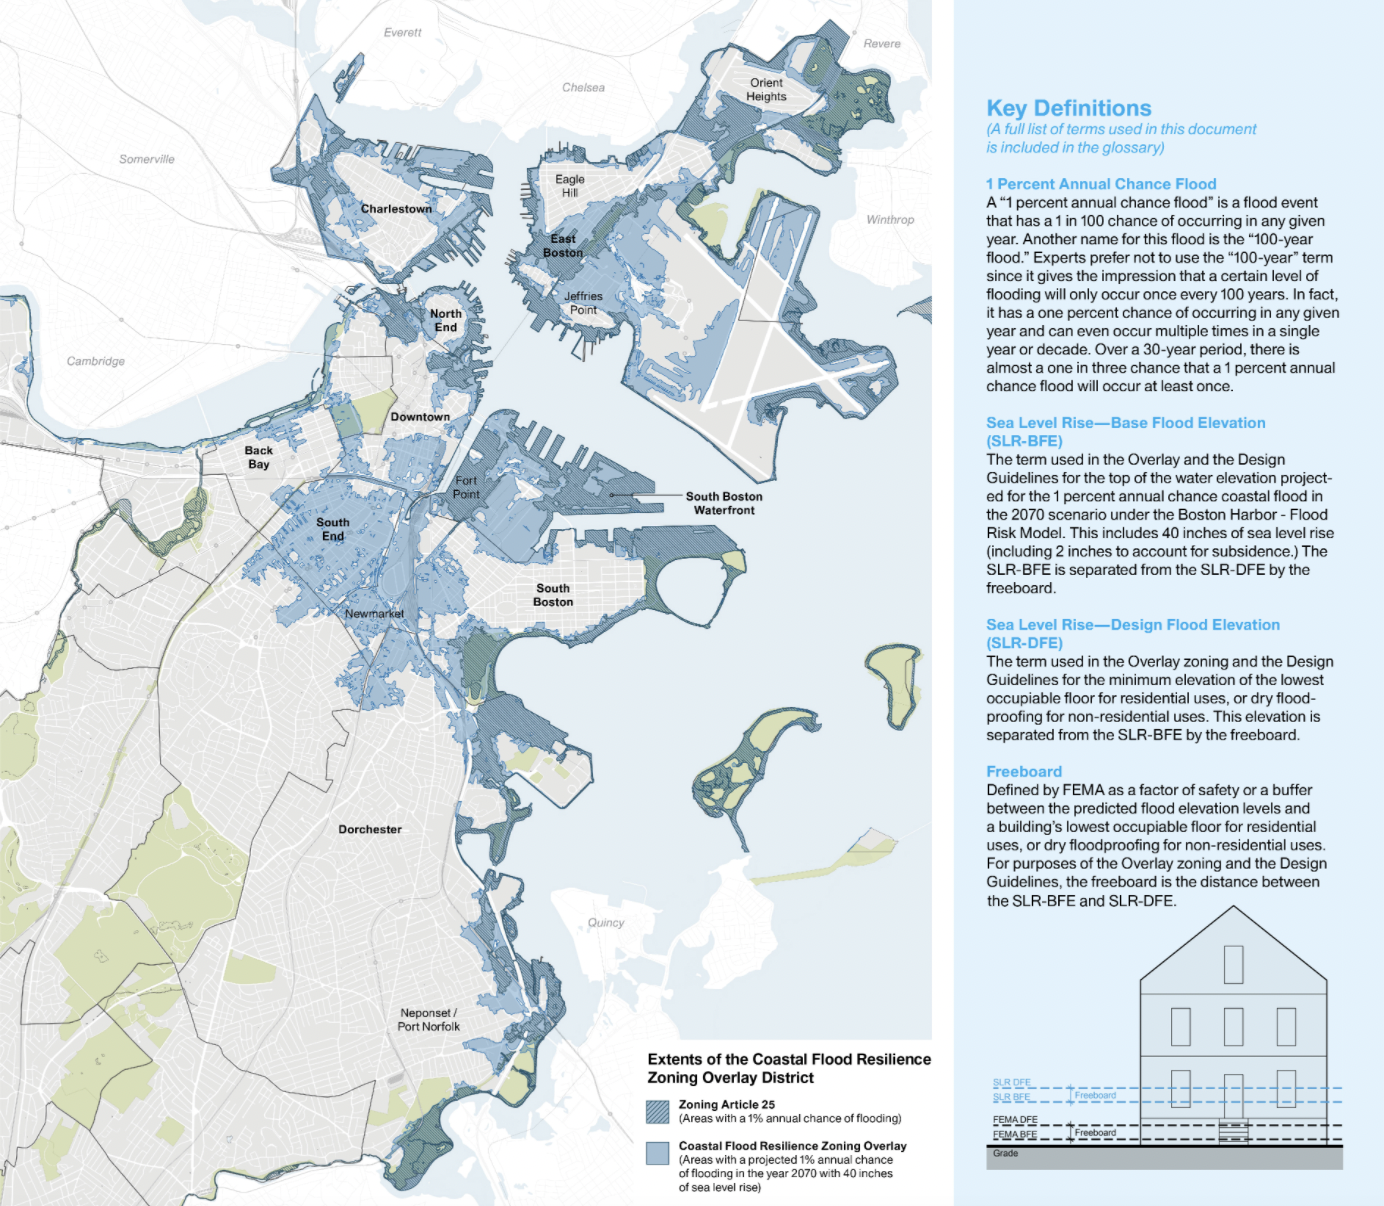 Boston Coastal Flood Resilience Design Guidelines and Zoning Overlay District.